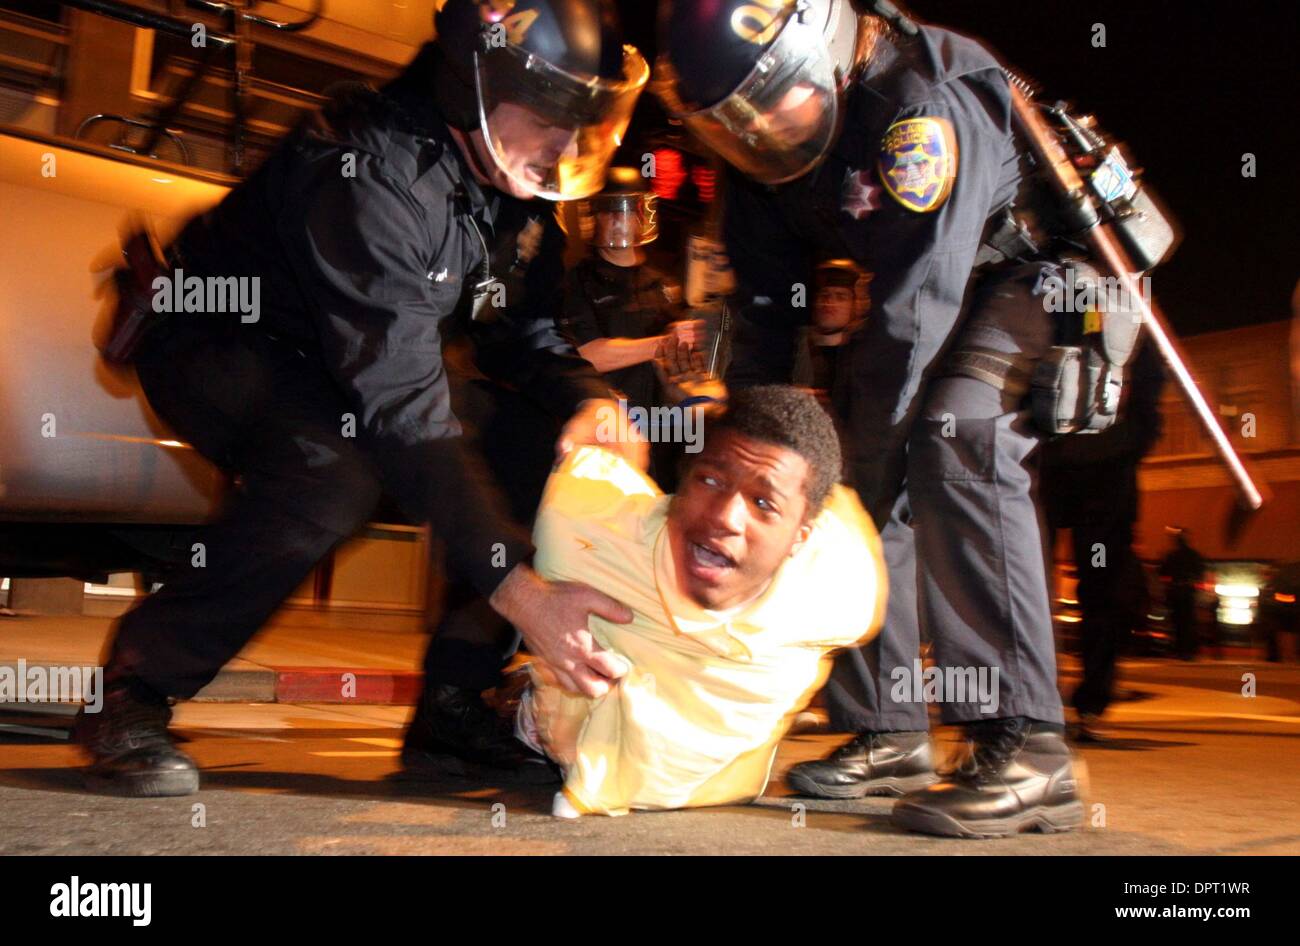 Police take a protester into custody along Fourteenth Street in Oakland, Calif., on Wednesday, January 7, 2009. Demonstrators from a protest against the fatal BART police shooting of Oscar Grant III took to Oakland streets Wednesday night blocking traffic, setting fires and damaging property. Scores of police, including BART police, Oakland Police Department and officers from the H Stock Photo